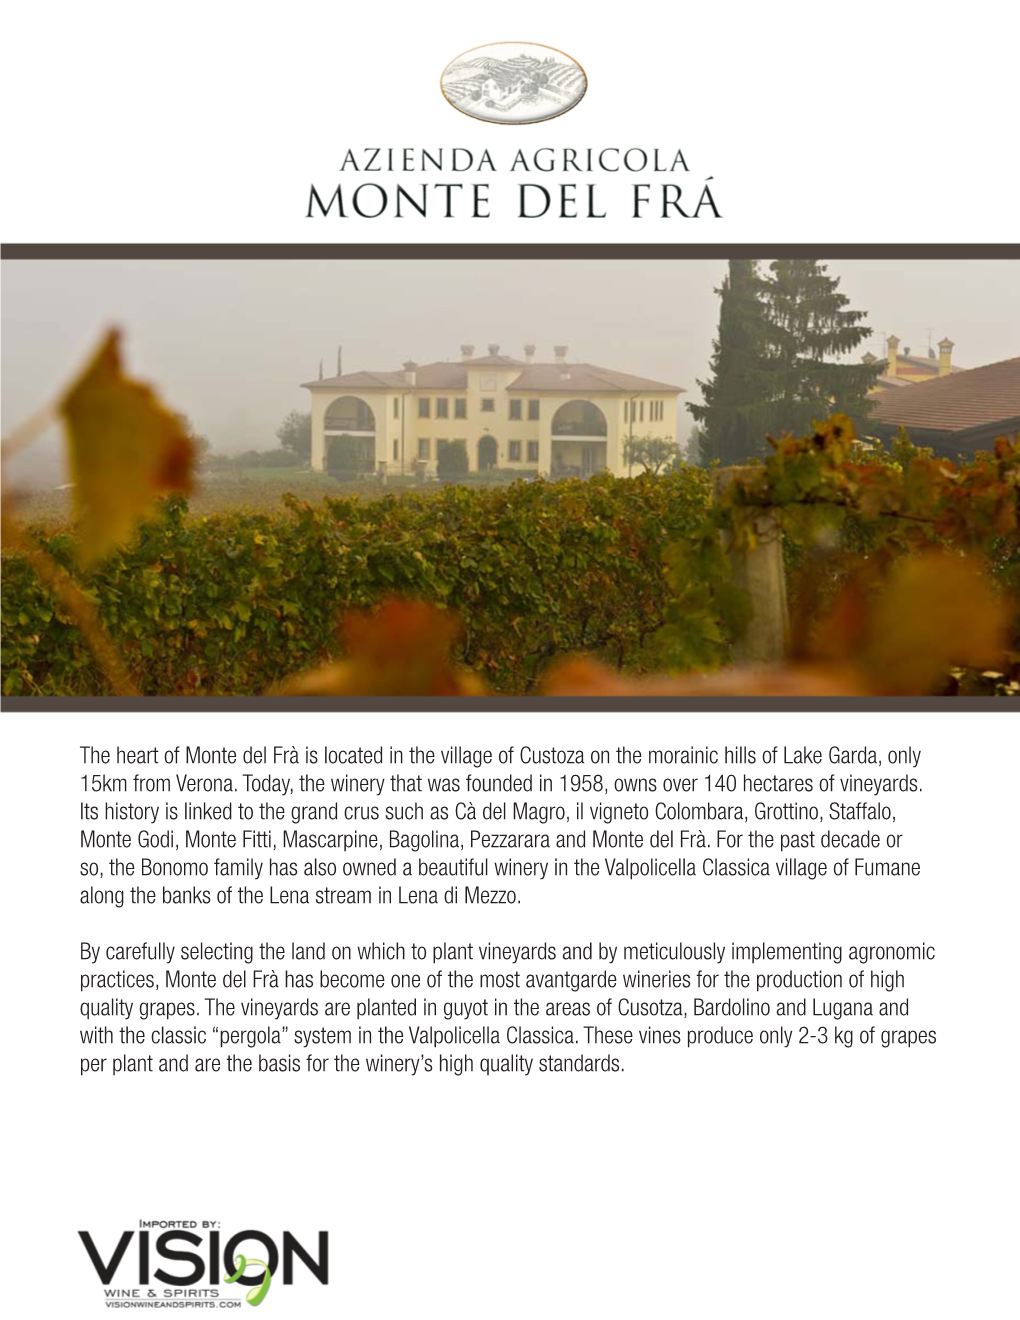 The Heart of Monte Del Frà Is Located in the Village of Custoza on the Morainic Hills of Lake Garda, Only 15Km from Verona